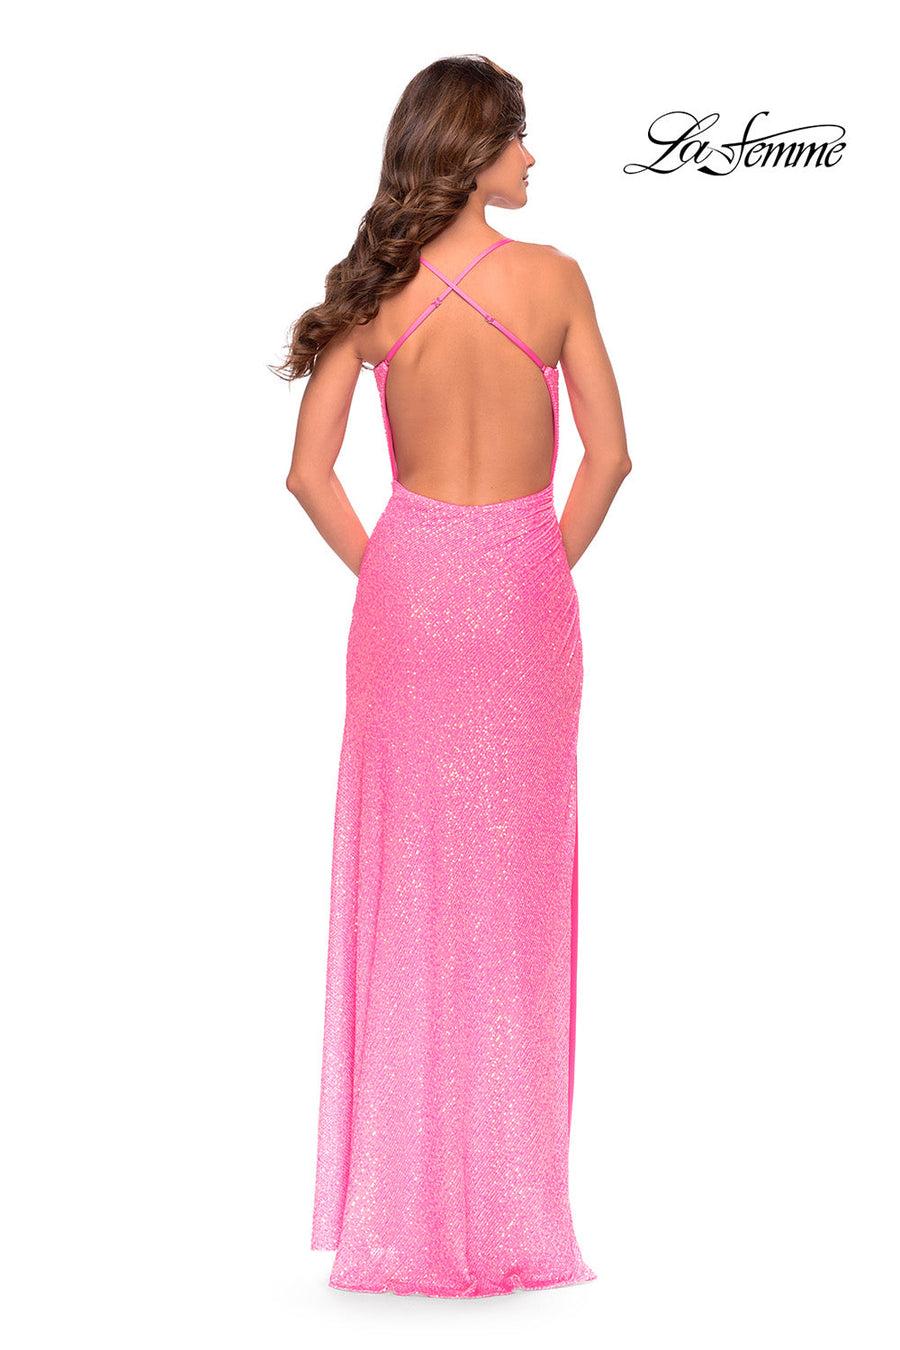 La Femme 31405 prom dress images.  La Femme 31405 is available in these colors: Hot Coral, Light Periwinkle, Neon Pink, Orange.